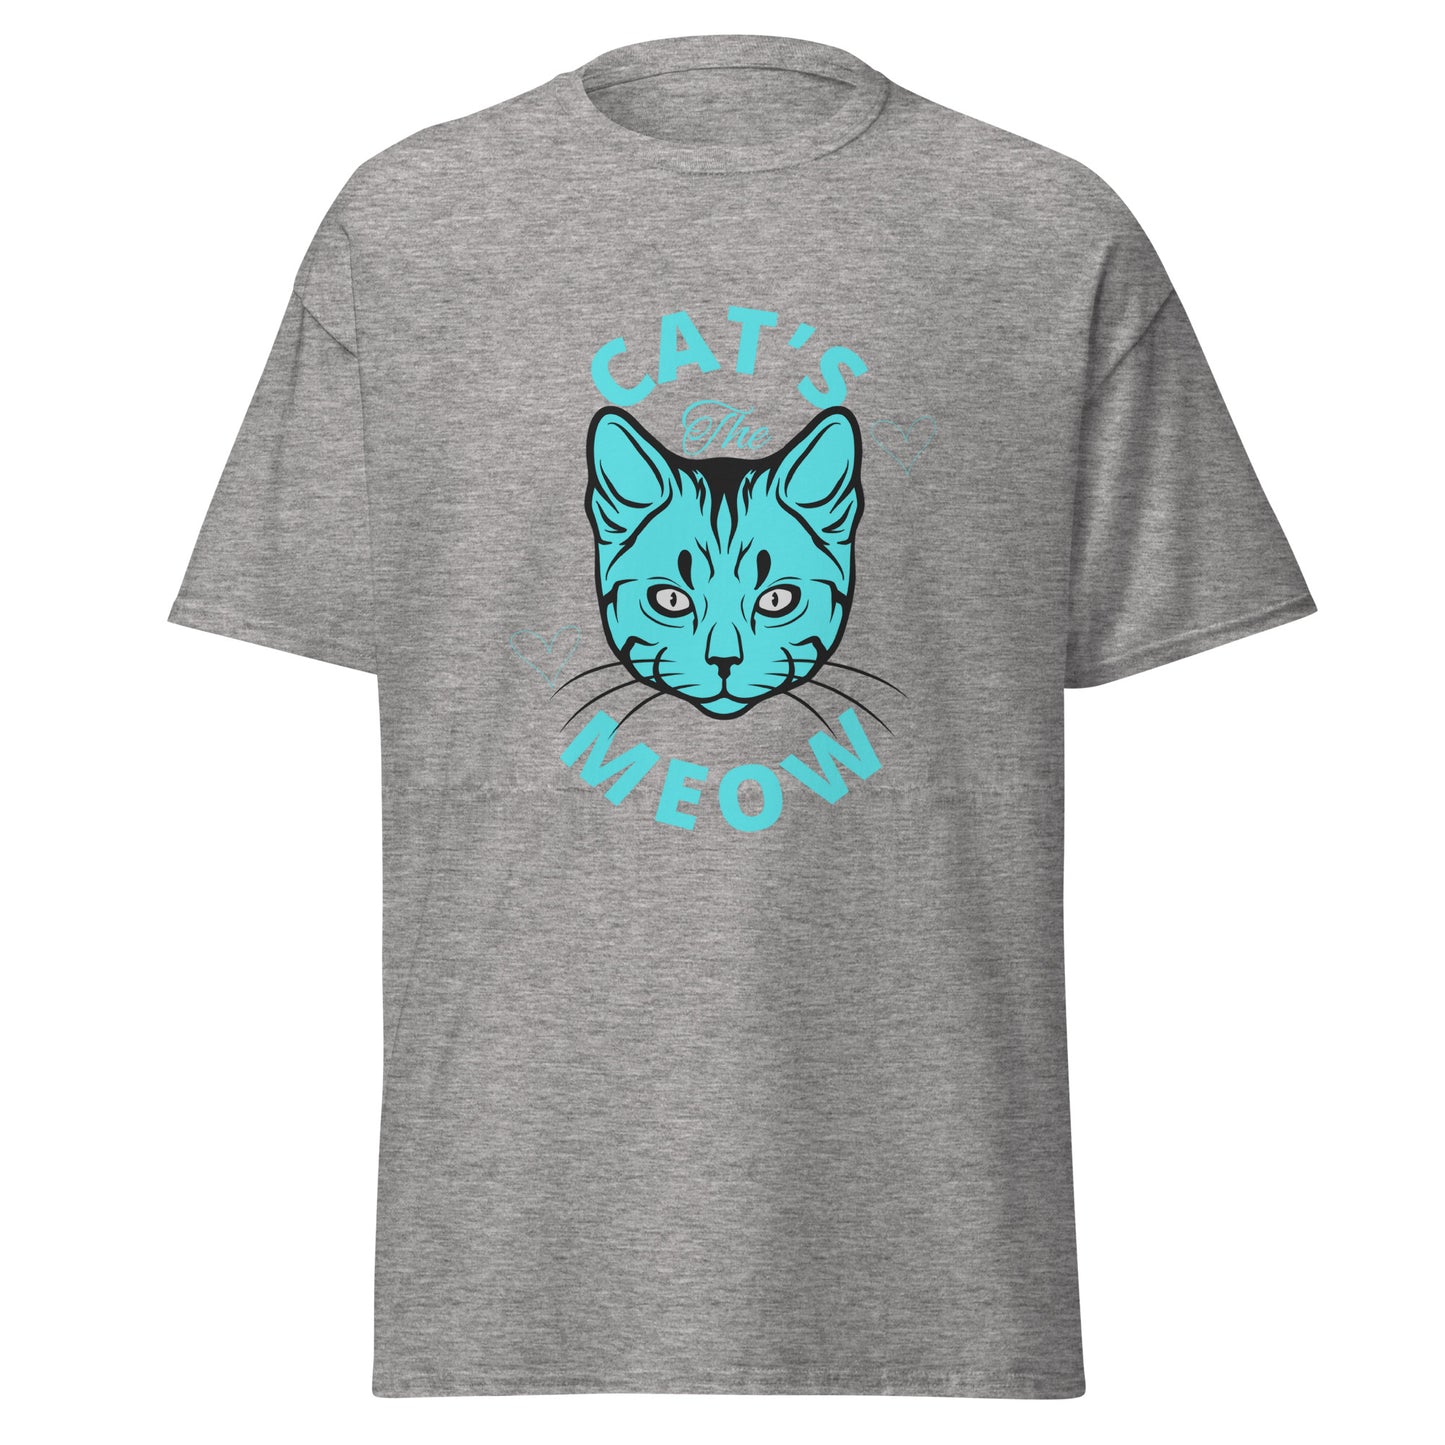 The Cat's Meow - Men's classic tee - 100% Cotton (Sizes: S-5XL) (Colours: Black/White/Grey) ~ Sharon Dawn Collection (Sale Price: $44.20 CAD)